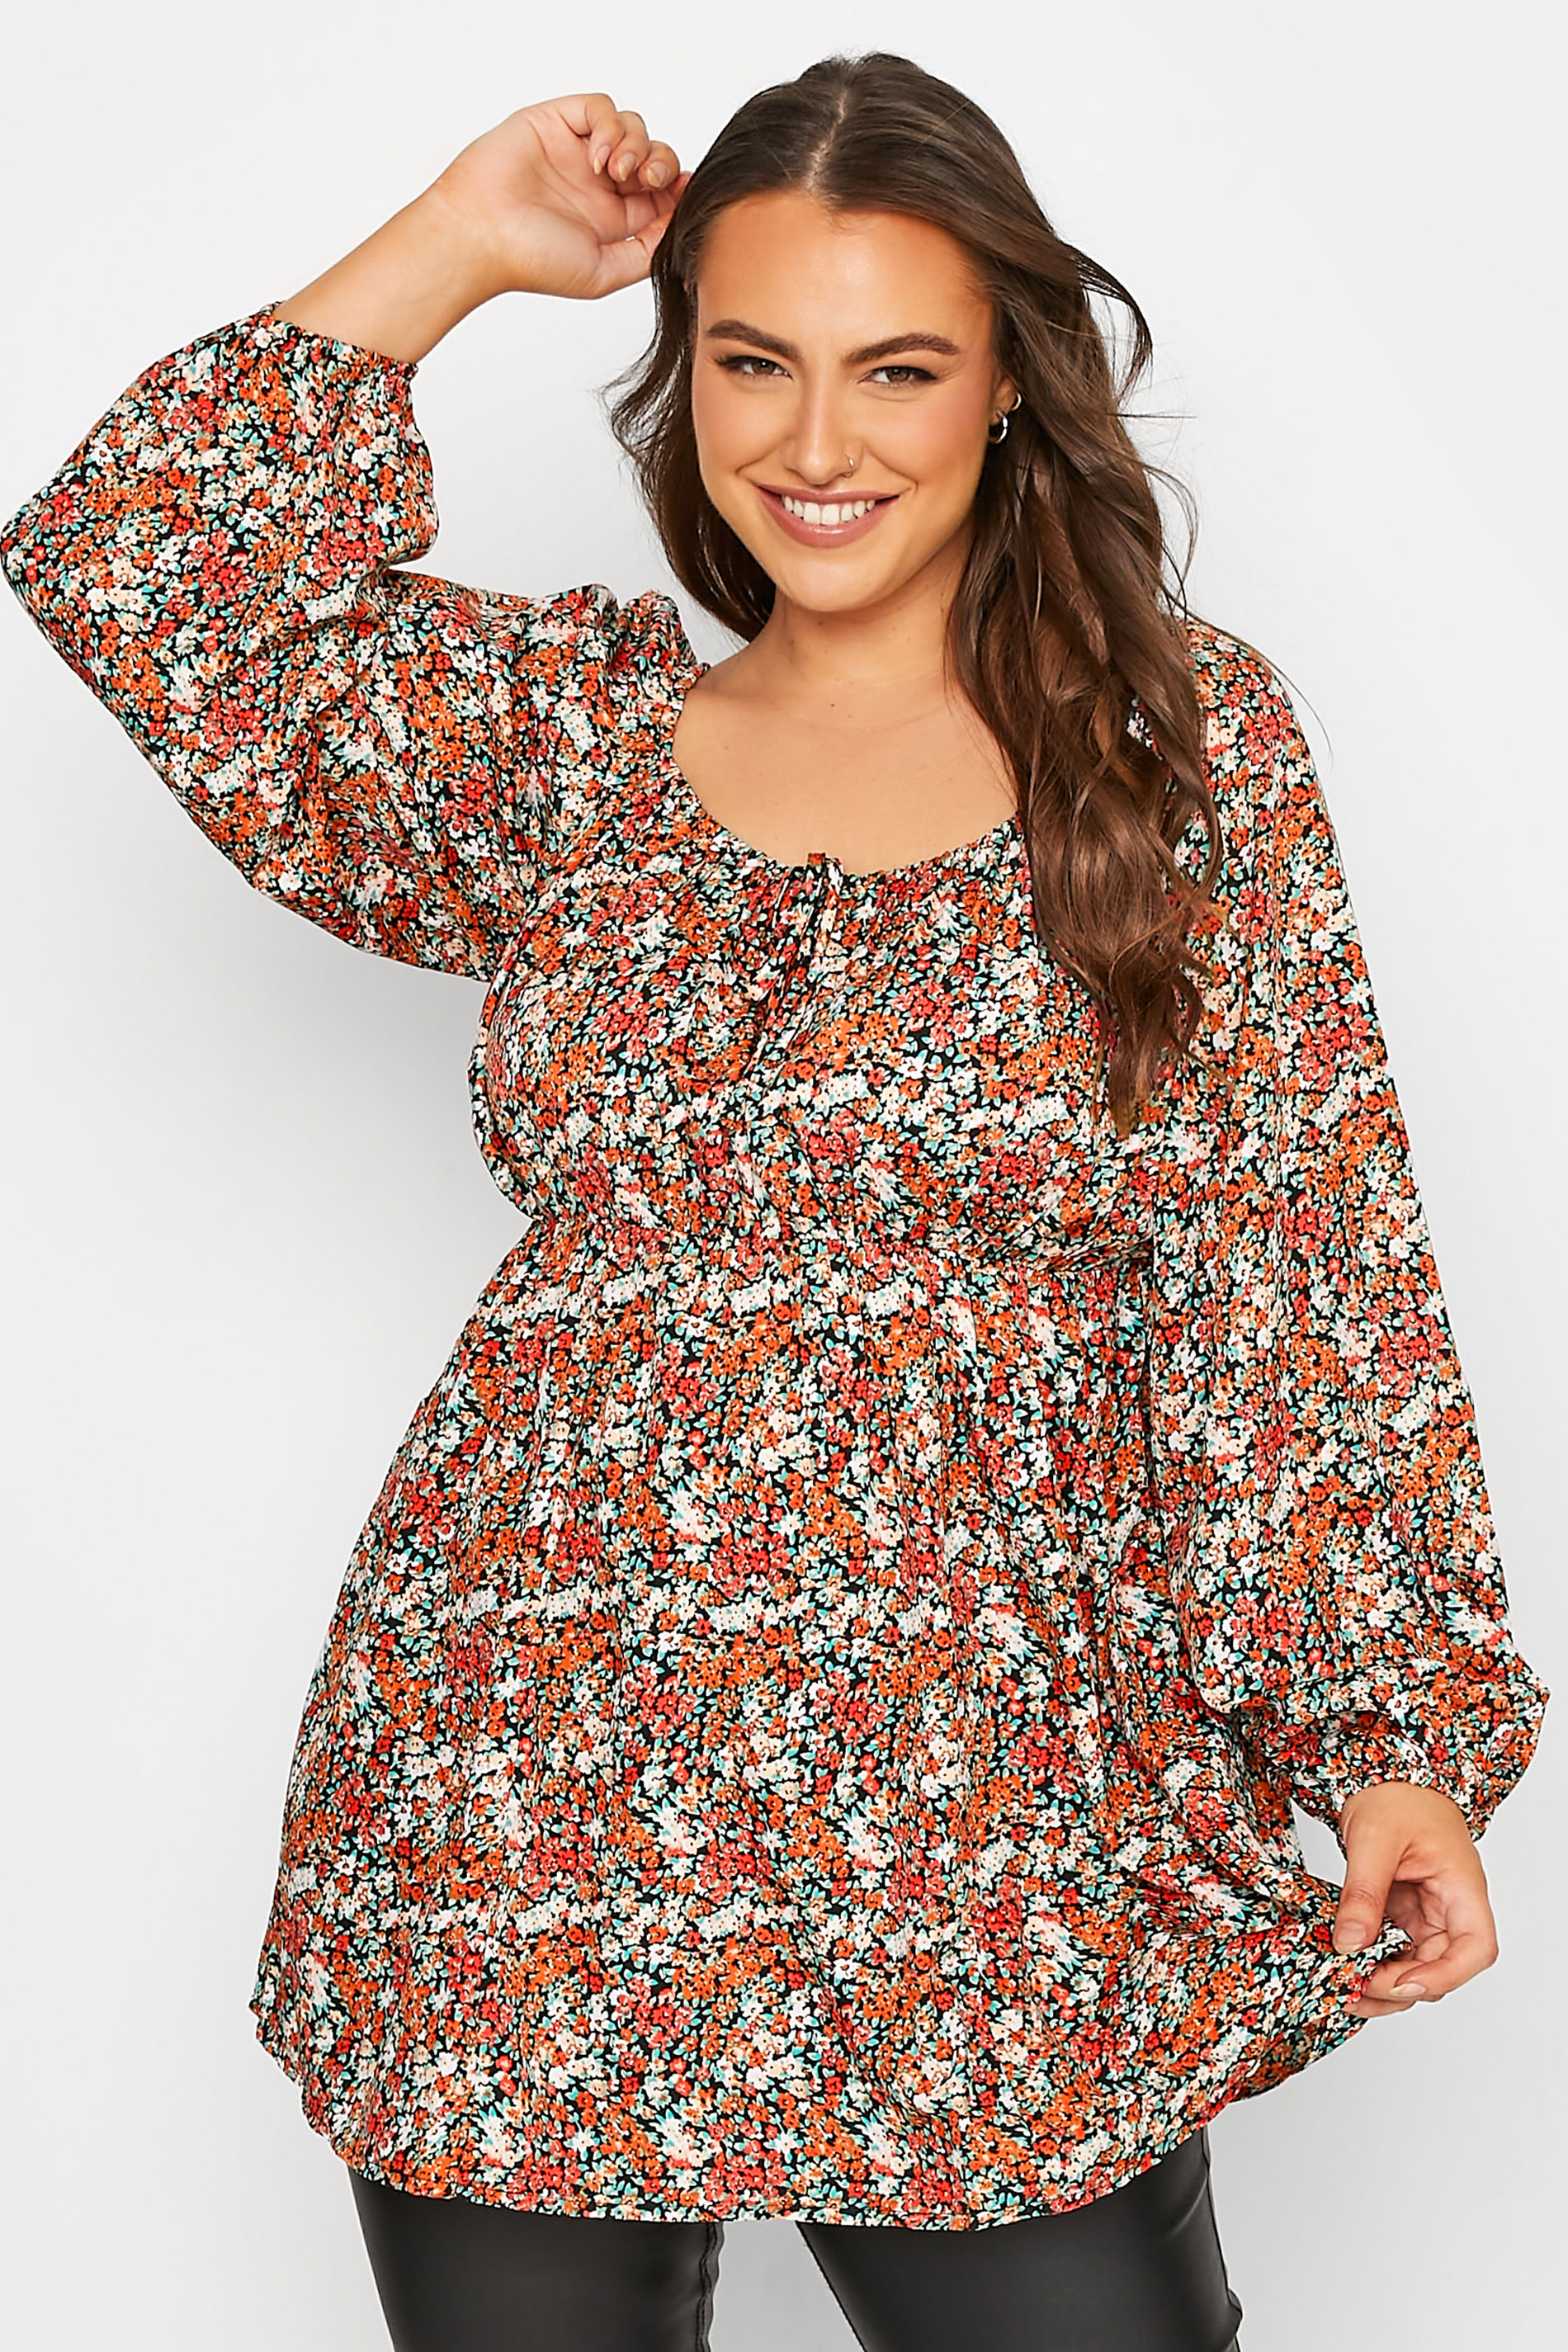 LIMITED COLLECTION Plus Size Black & Orange Floral Gypsy Blouse | Yours Clothing 1